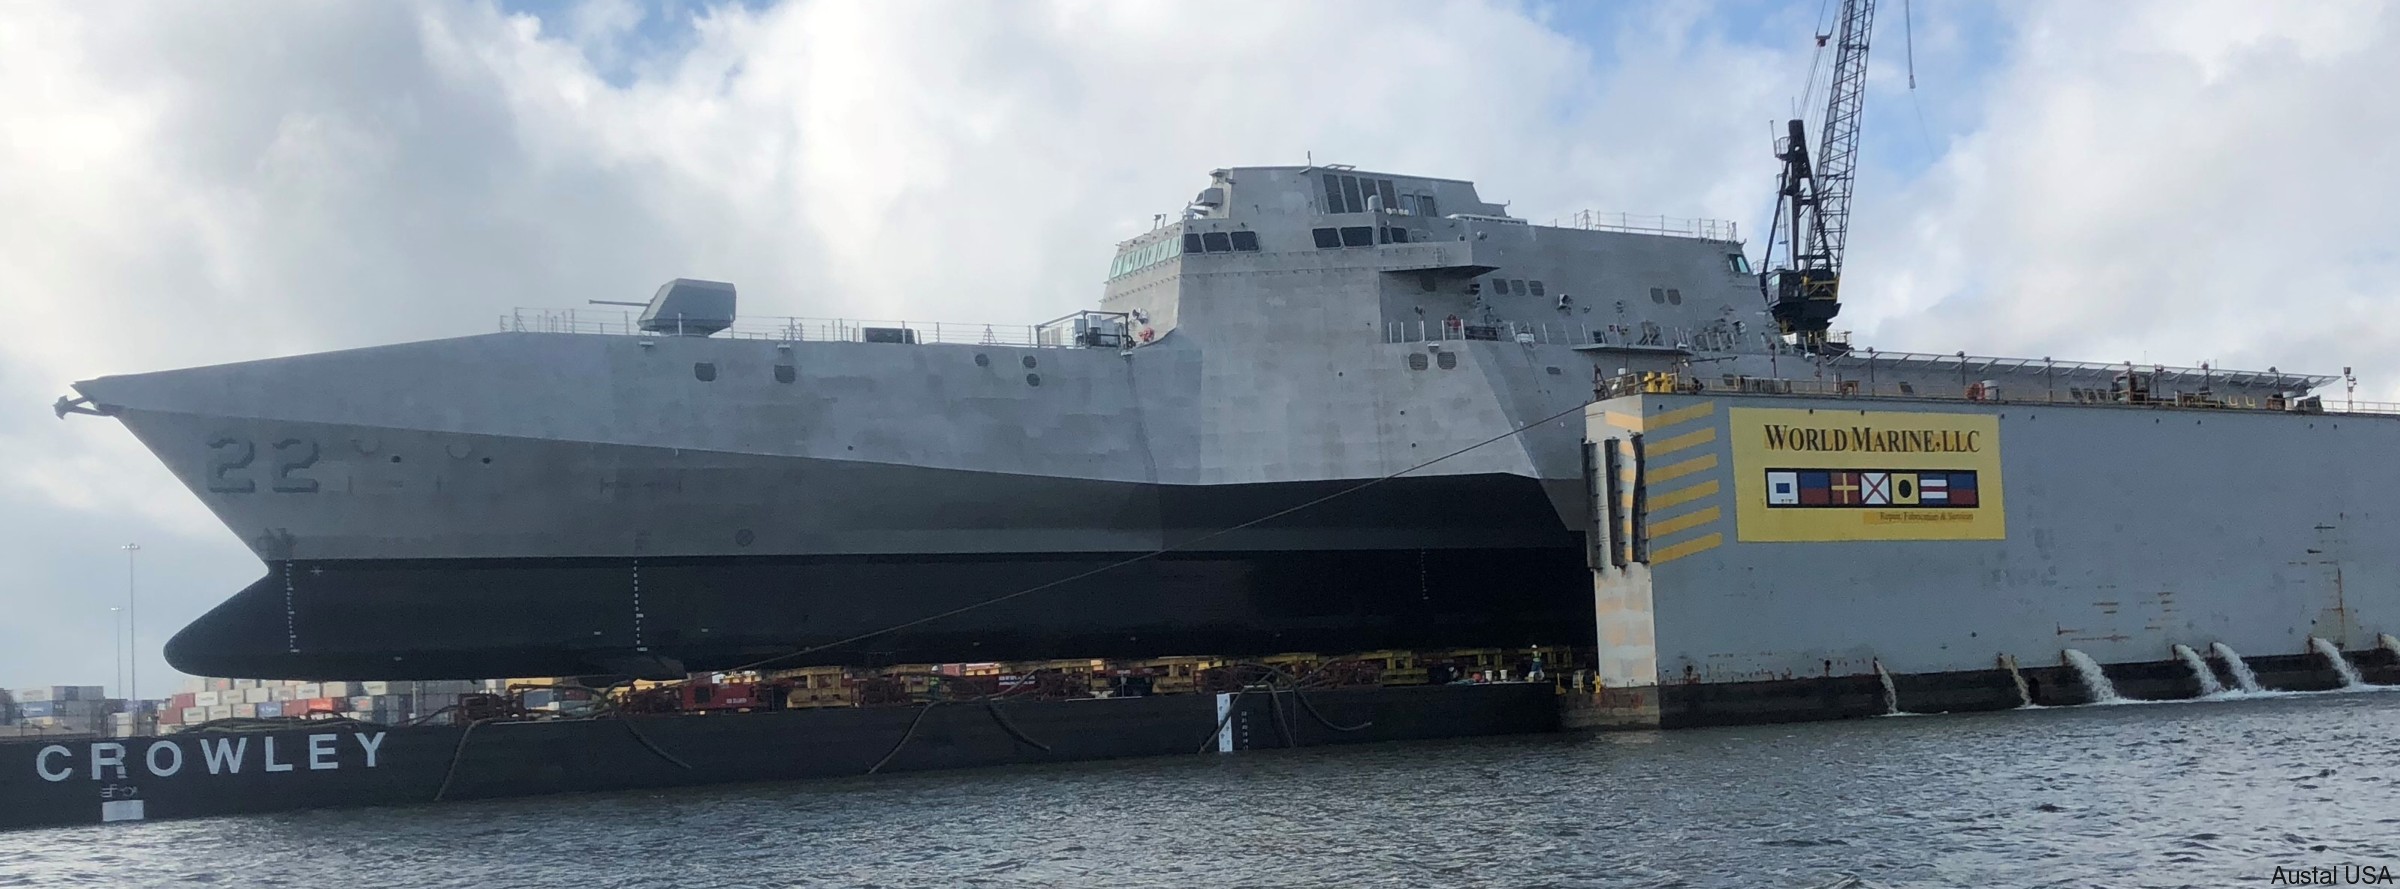 lcs-22 uss kansas city independence class littoral combat ship us navy 10 roll out launching austal mobile alabama